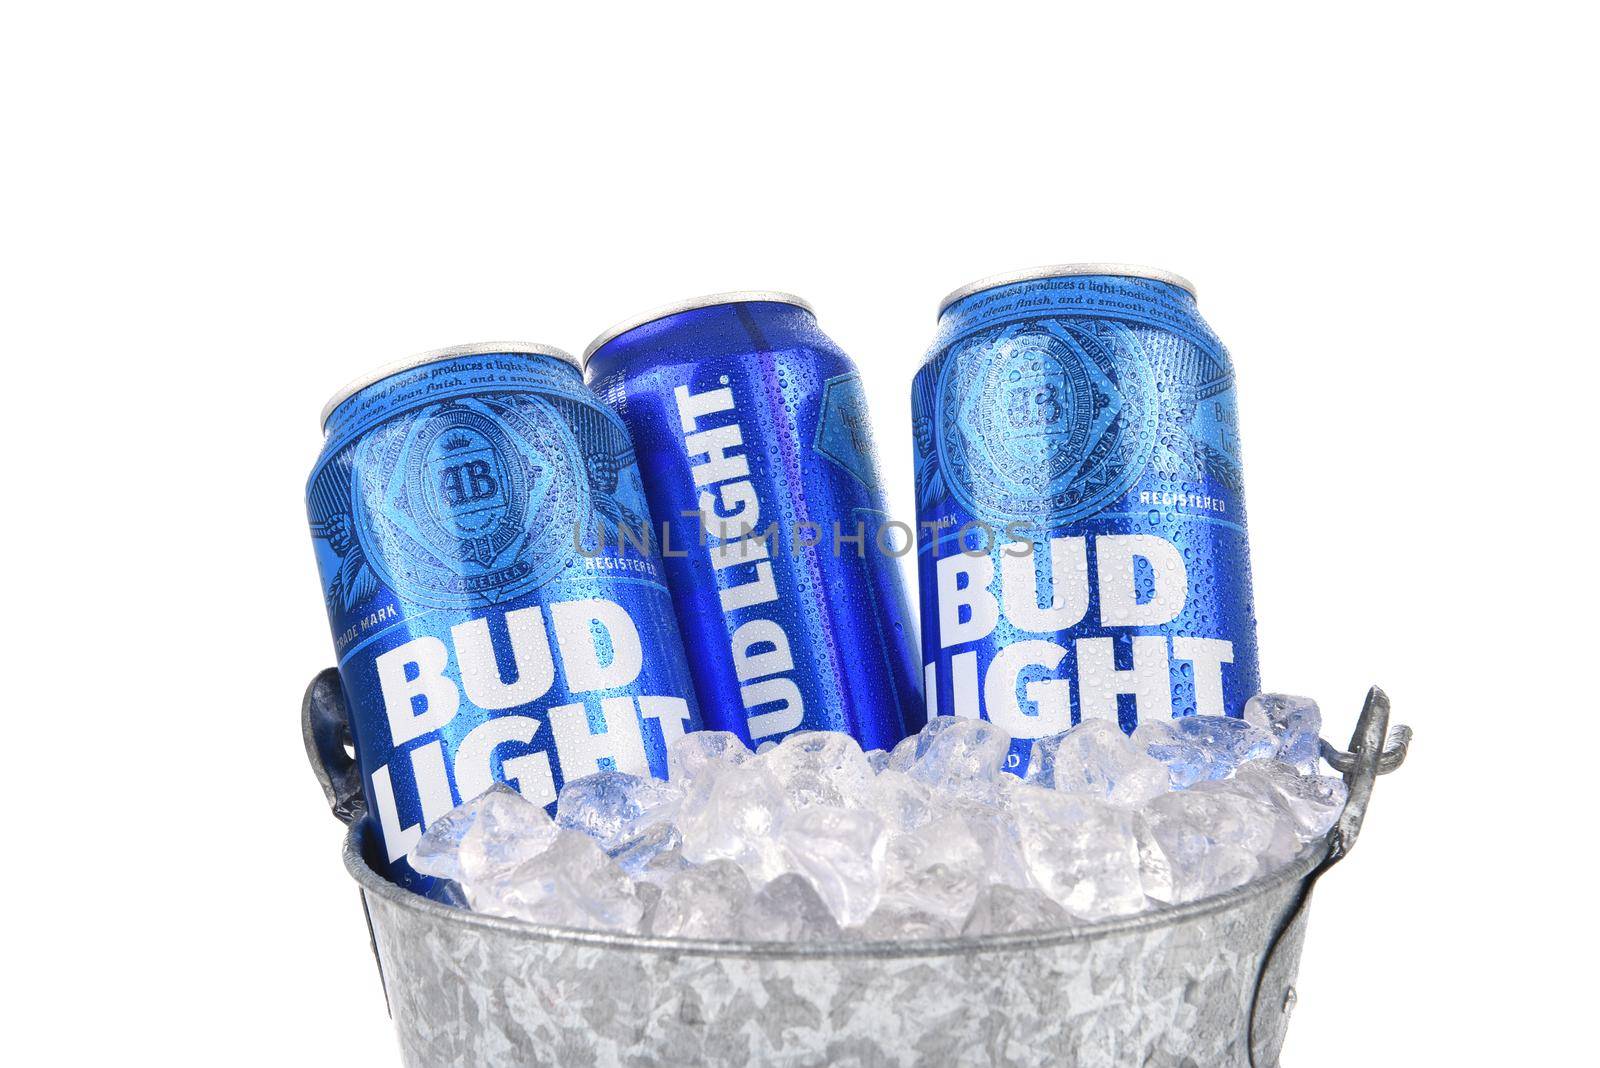 IRVINE, CALIFORNIA - AUGUST 25, 2016: Bud Light Cans in ice bucket. Bud Light is one of the top selling domestic beers in the United States.